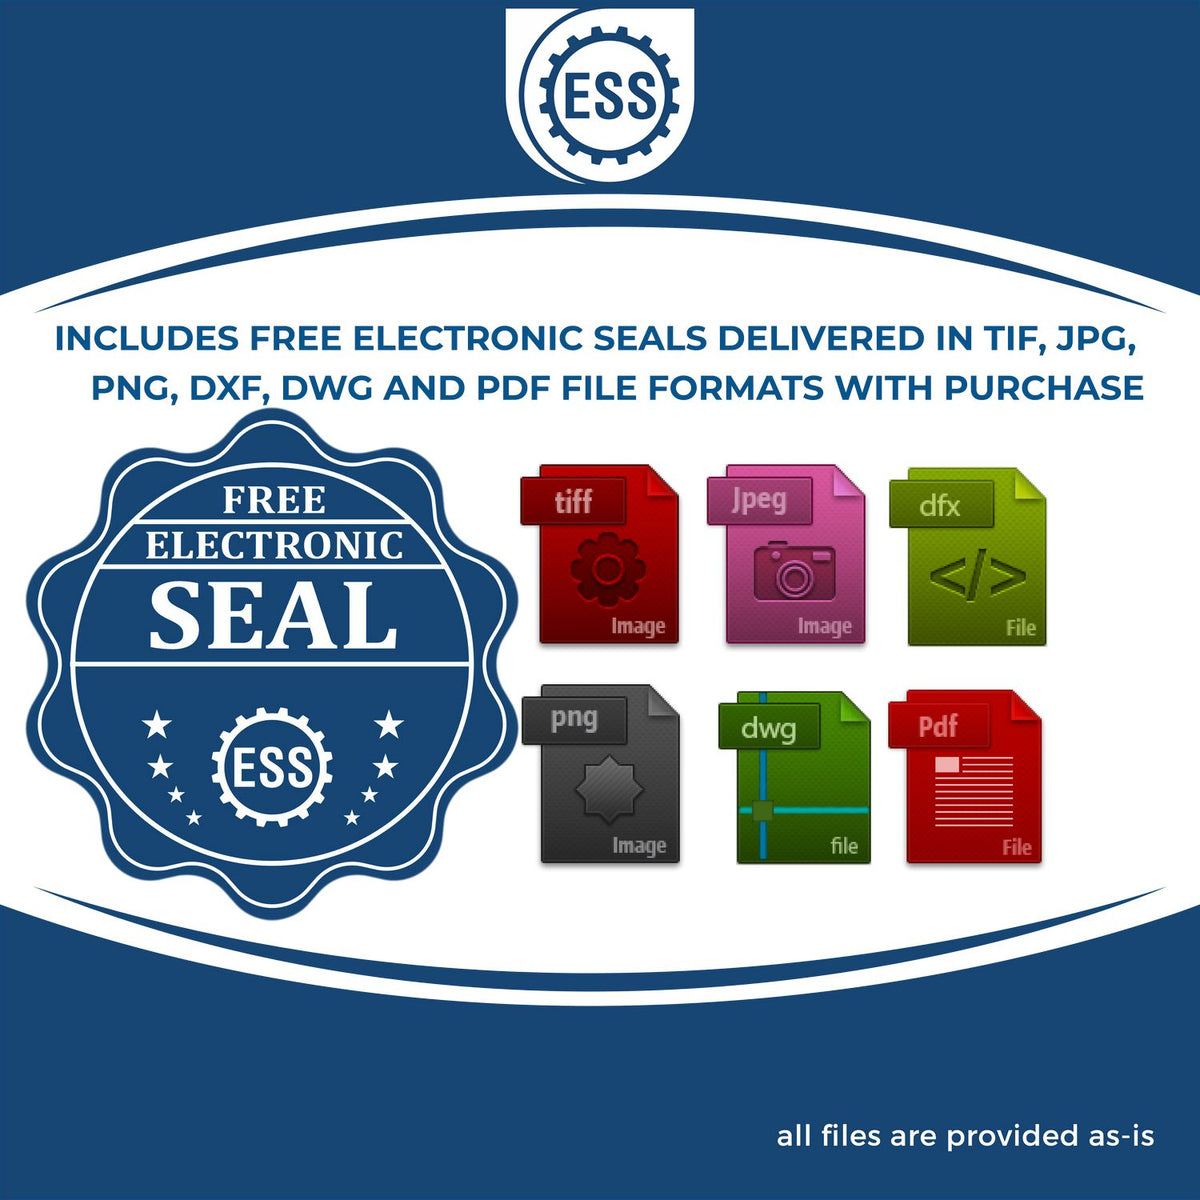 An infographic for the free electronic seal for the Gift New York Geologist Seal illustrating the different file type icons such as DXF, DWG, TIF, JPG and PNG.